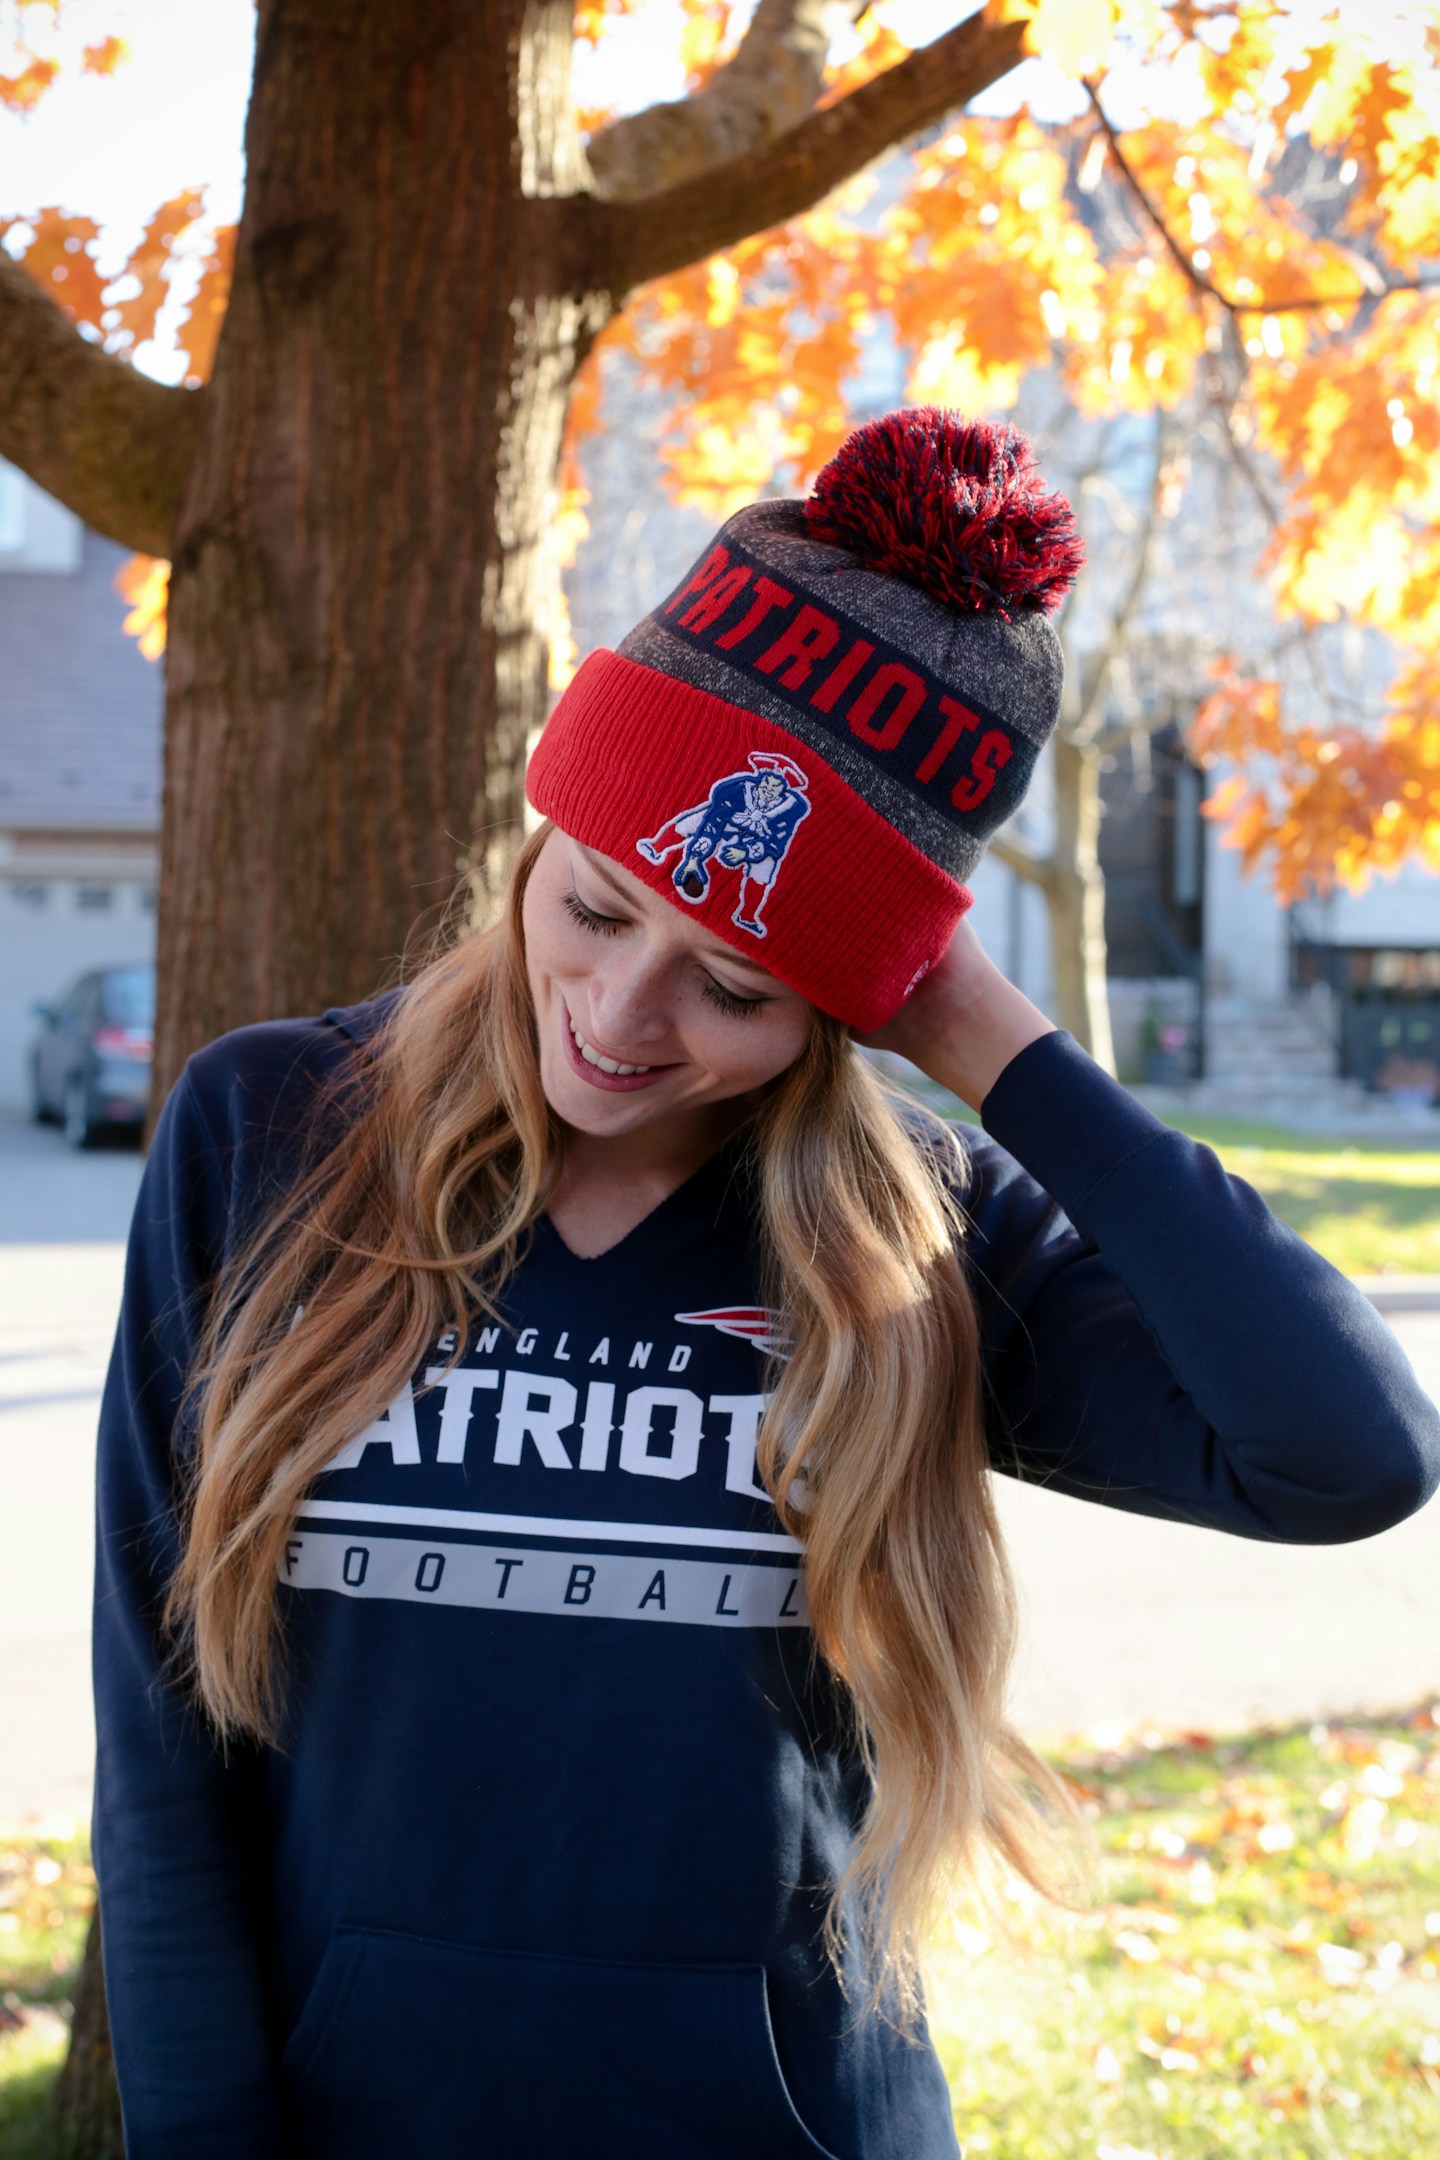 Game Day Gear: Patriots outfit ideas + Giveaway